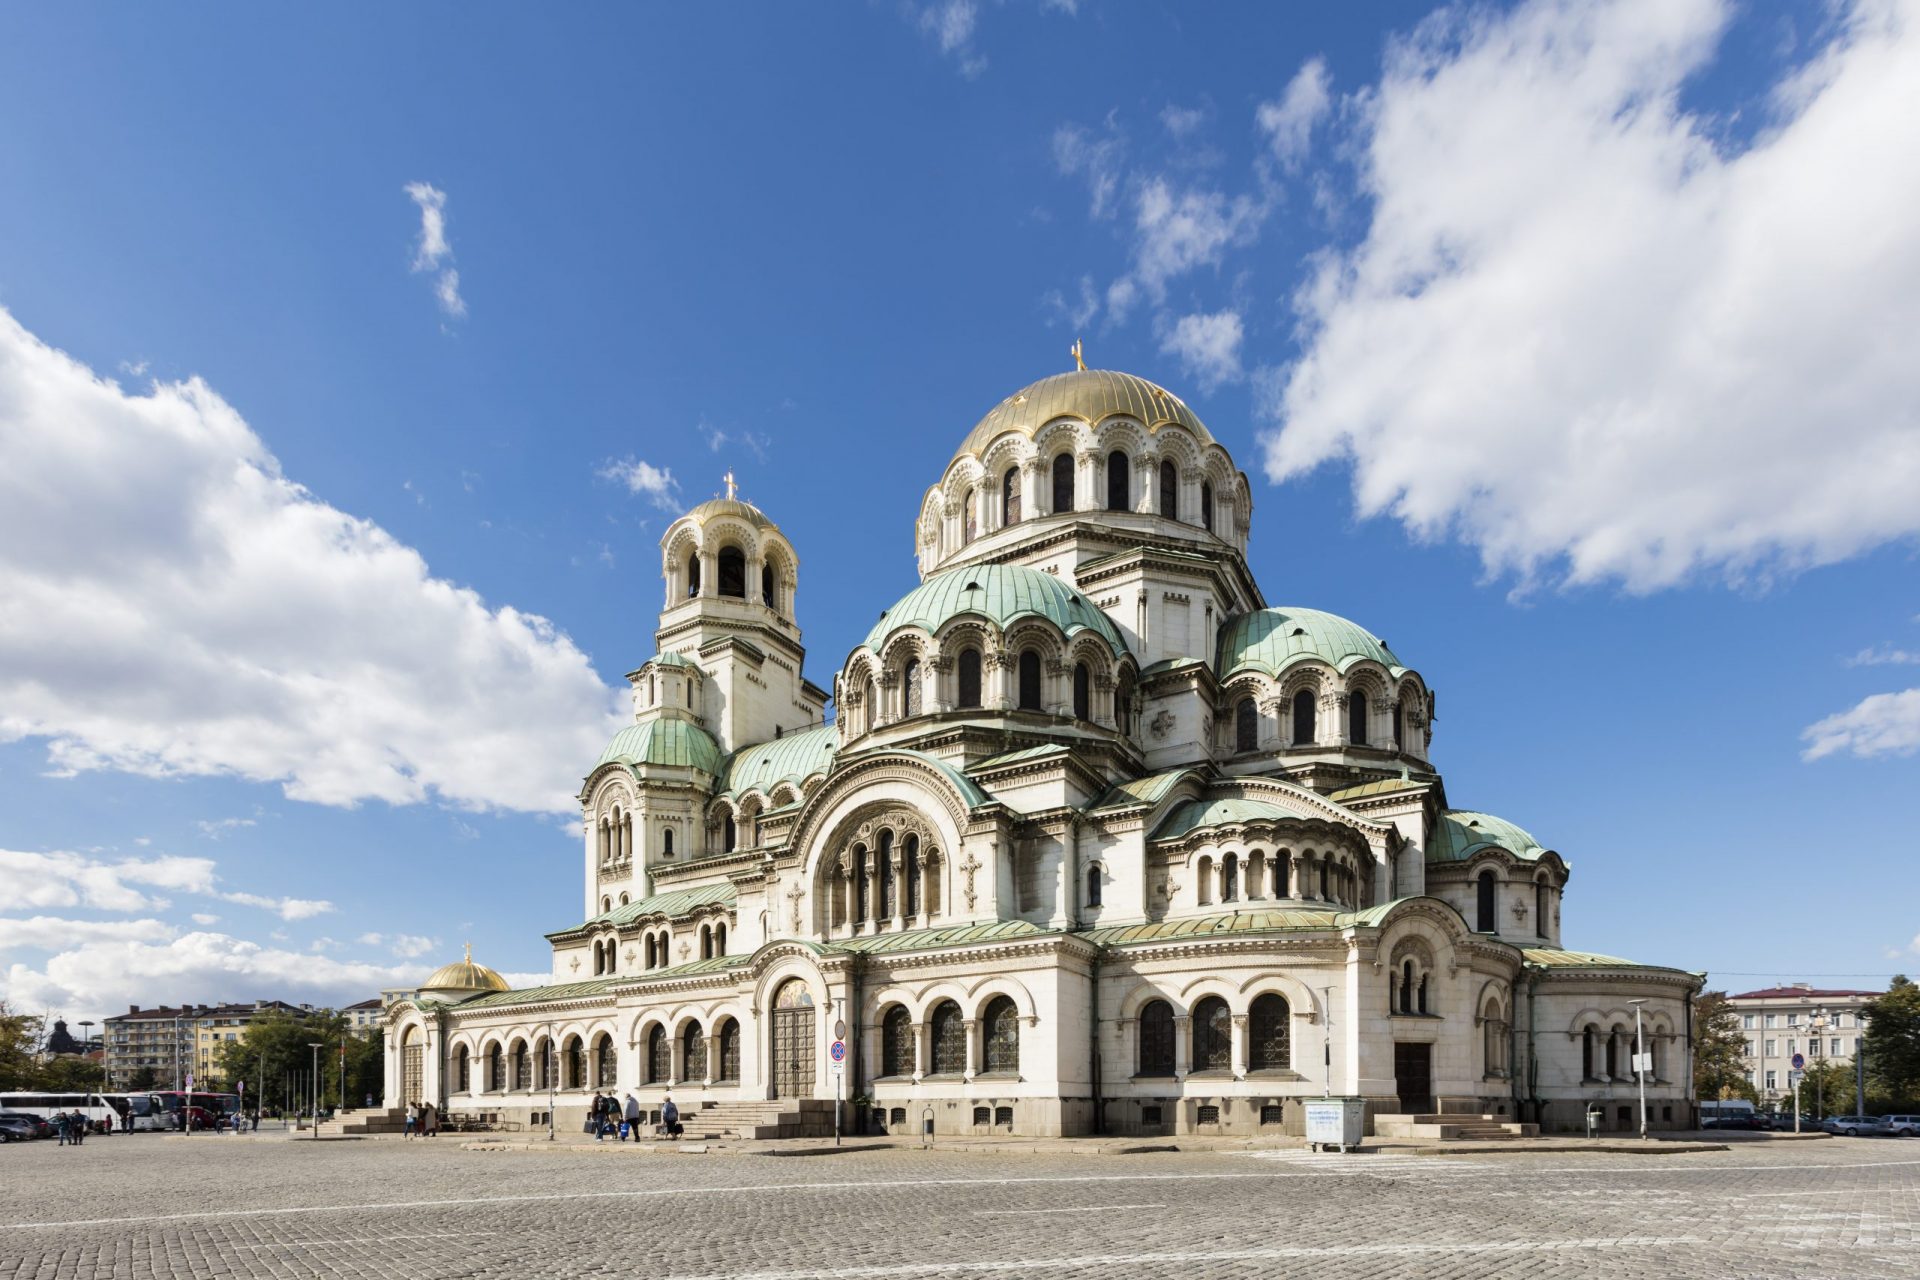 <p>In the center of Sofia, St. Alexander Nevsky Cathedral is one of the symbols of the city. Impressive inside and out, this huge Orthodox monument can accommodate up to 10,000 worshippers. A place to visit, absolutely, whatever your faith.</p>